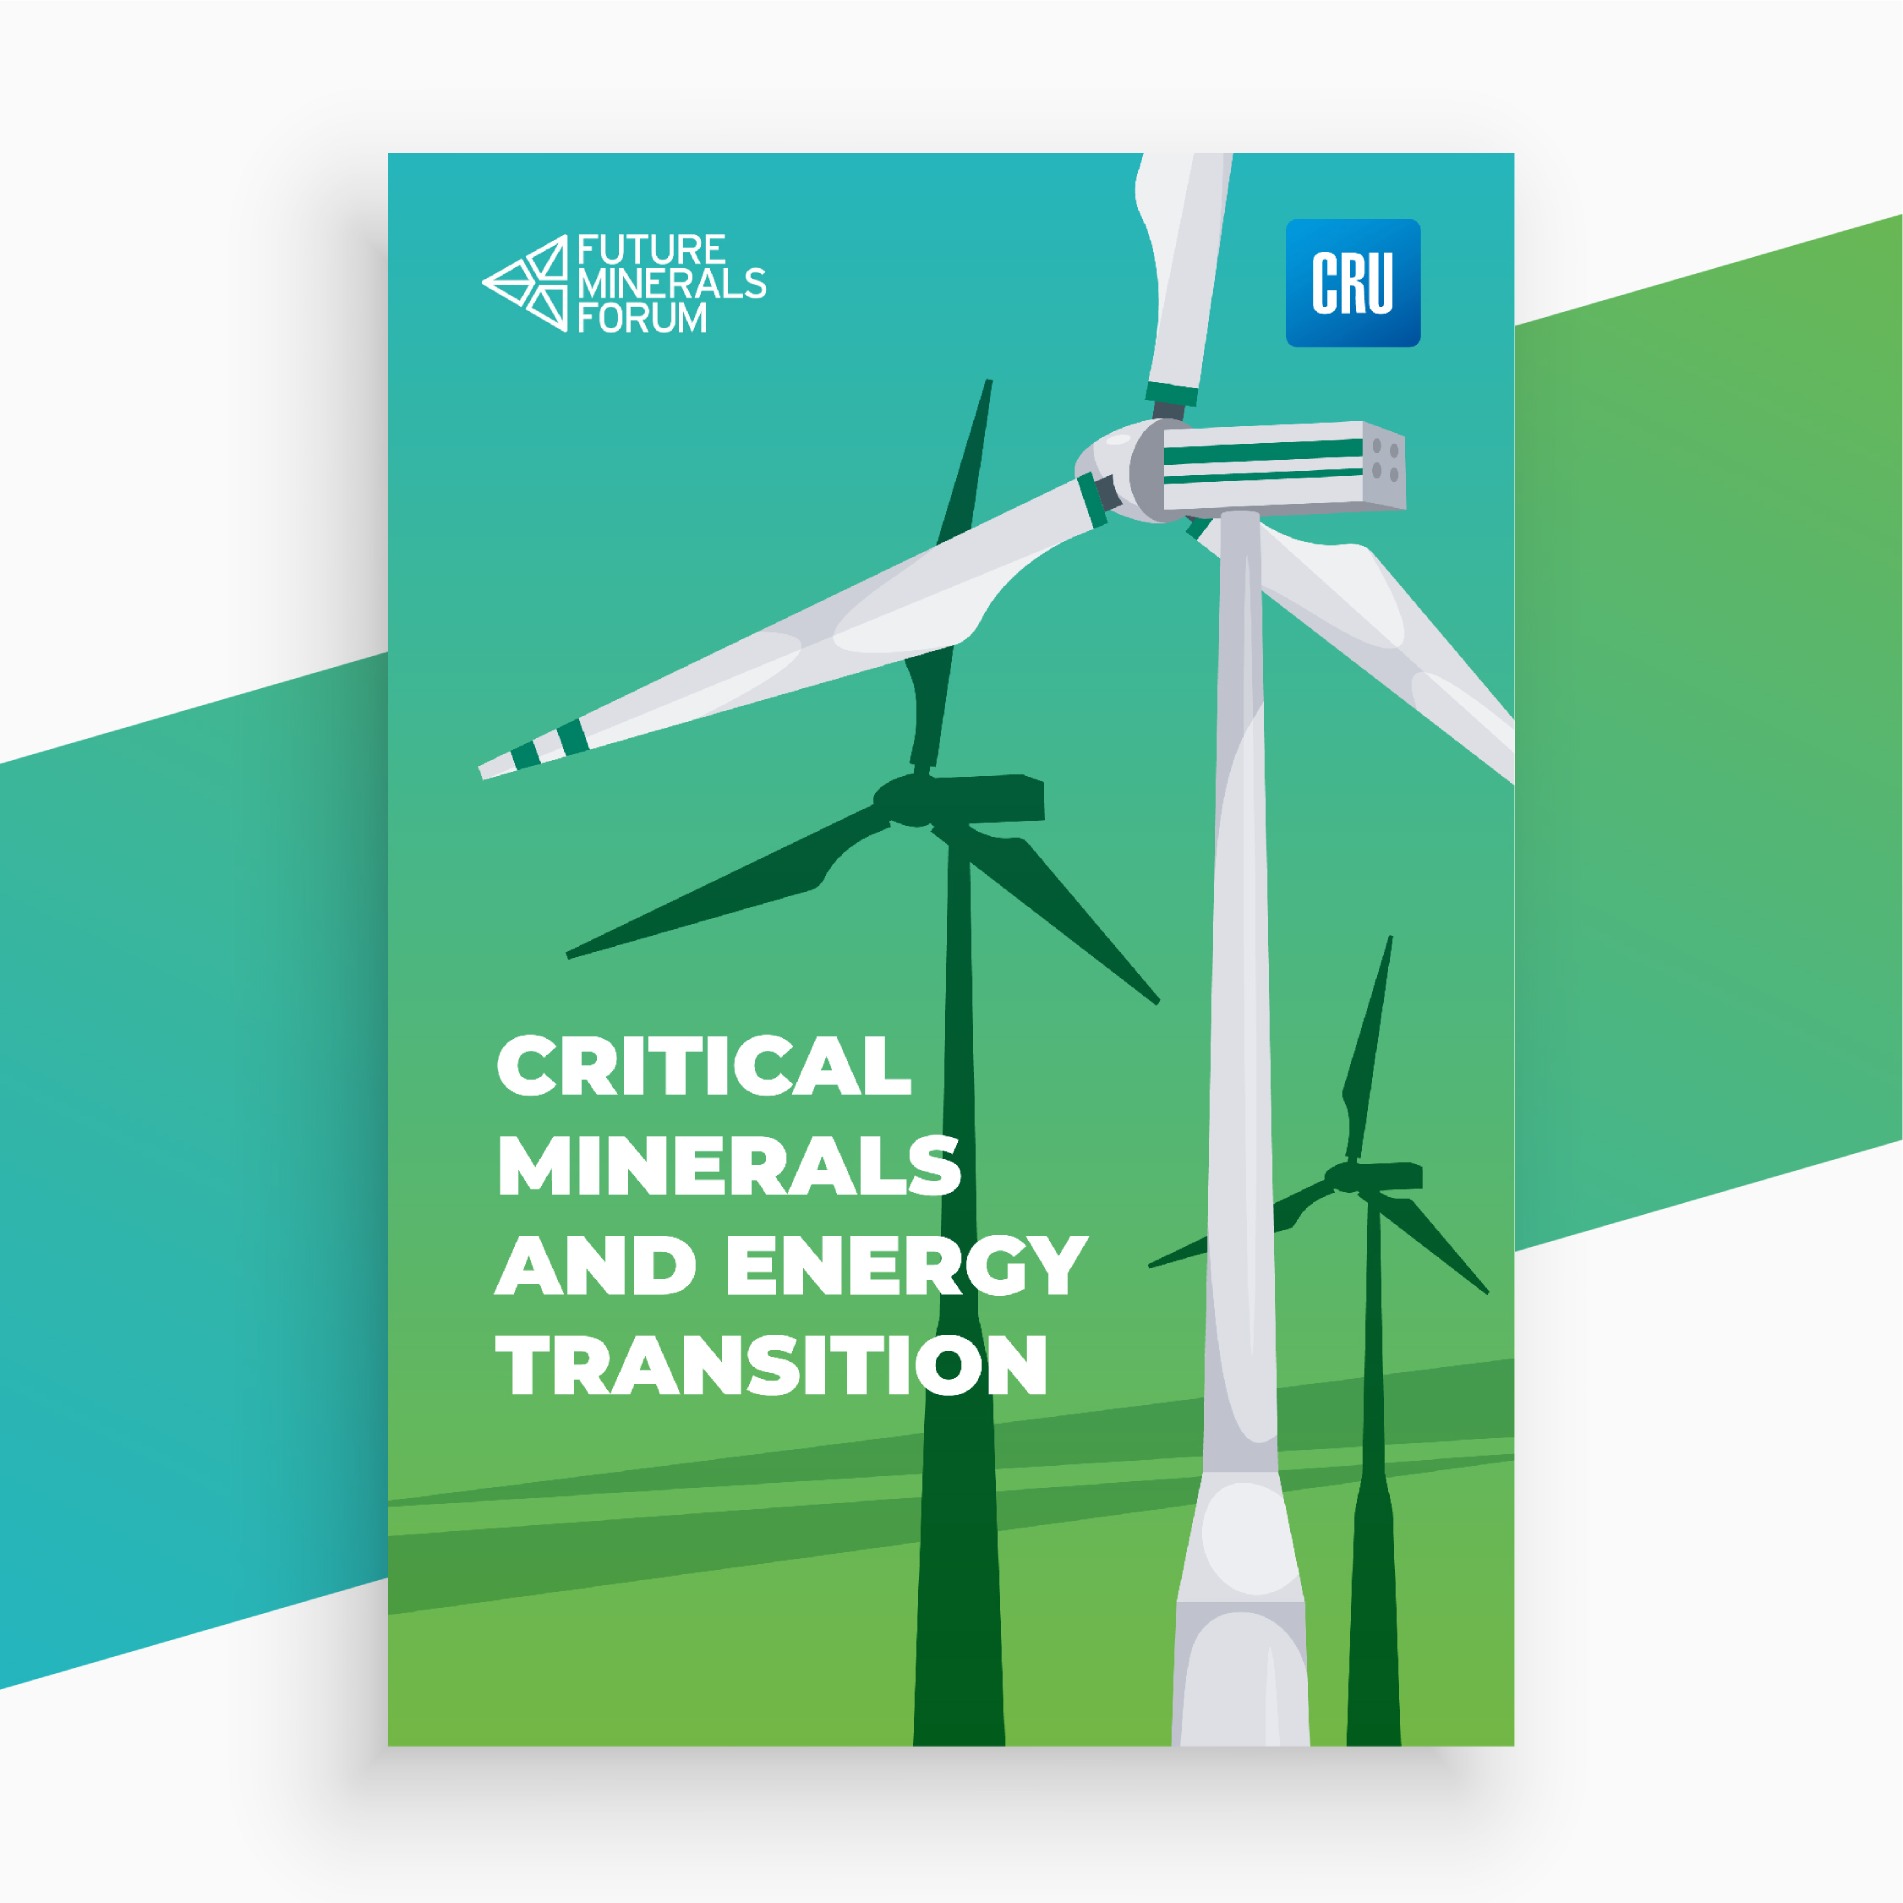 CRITICAL  MINERALS  AND ENERGY  TRANSITION